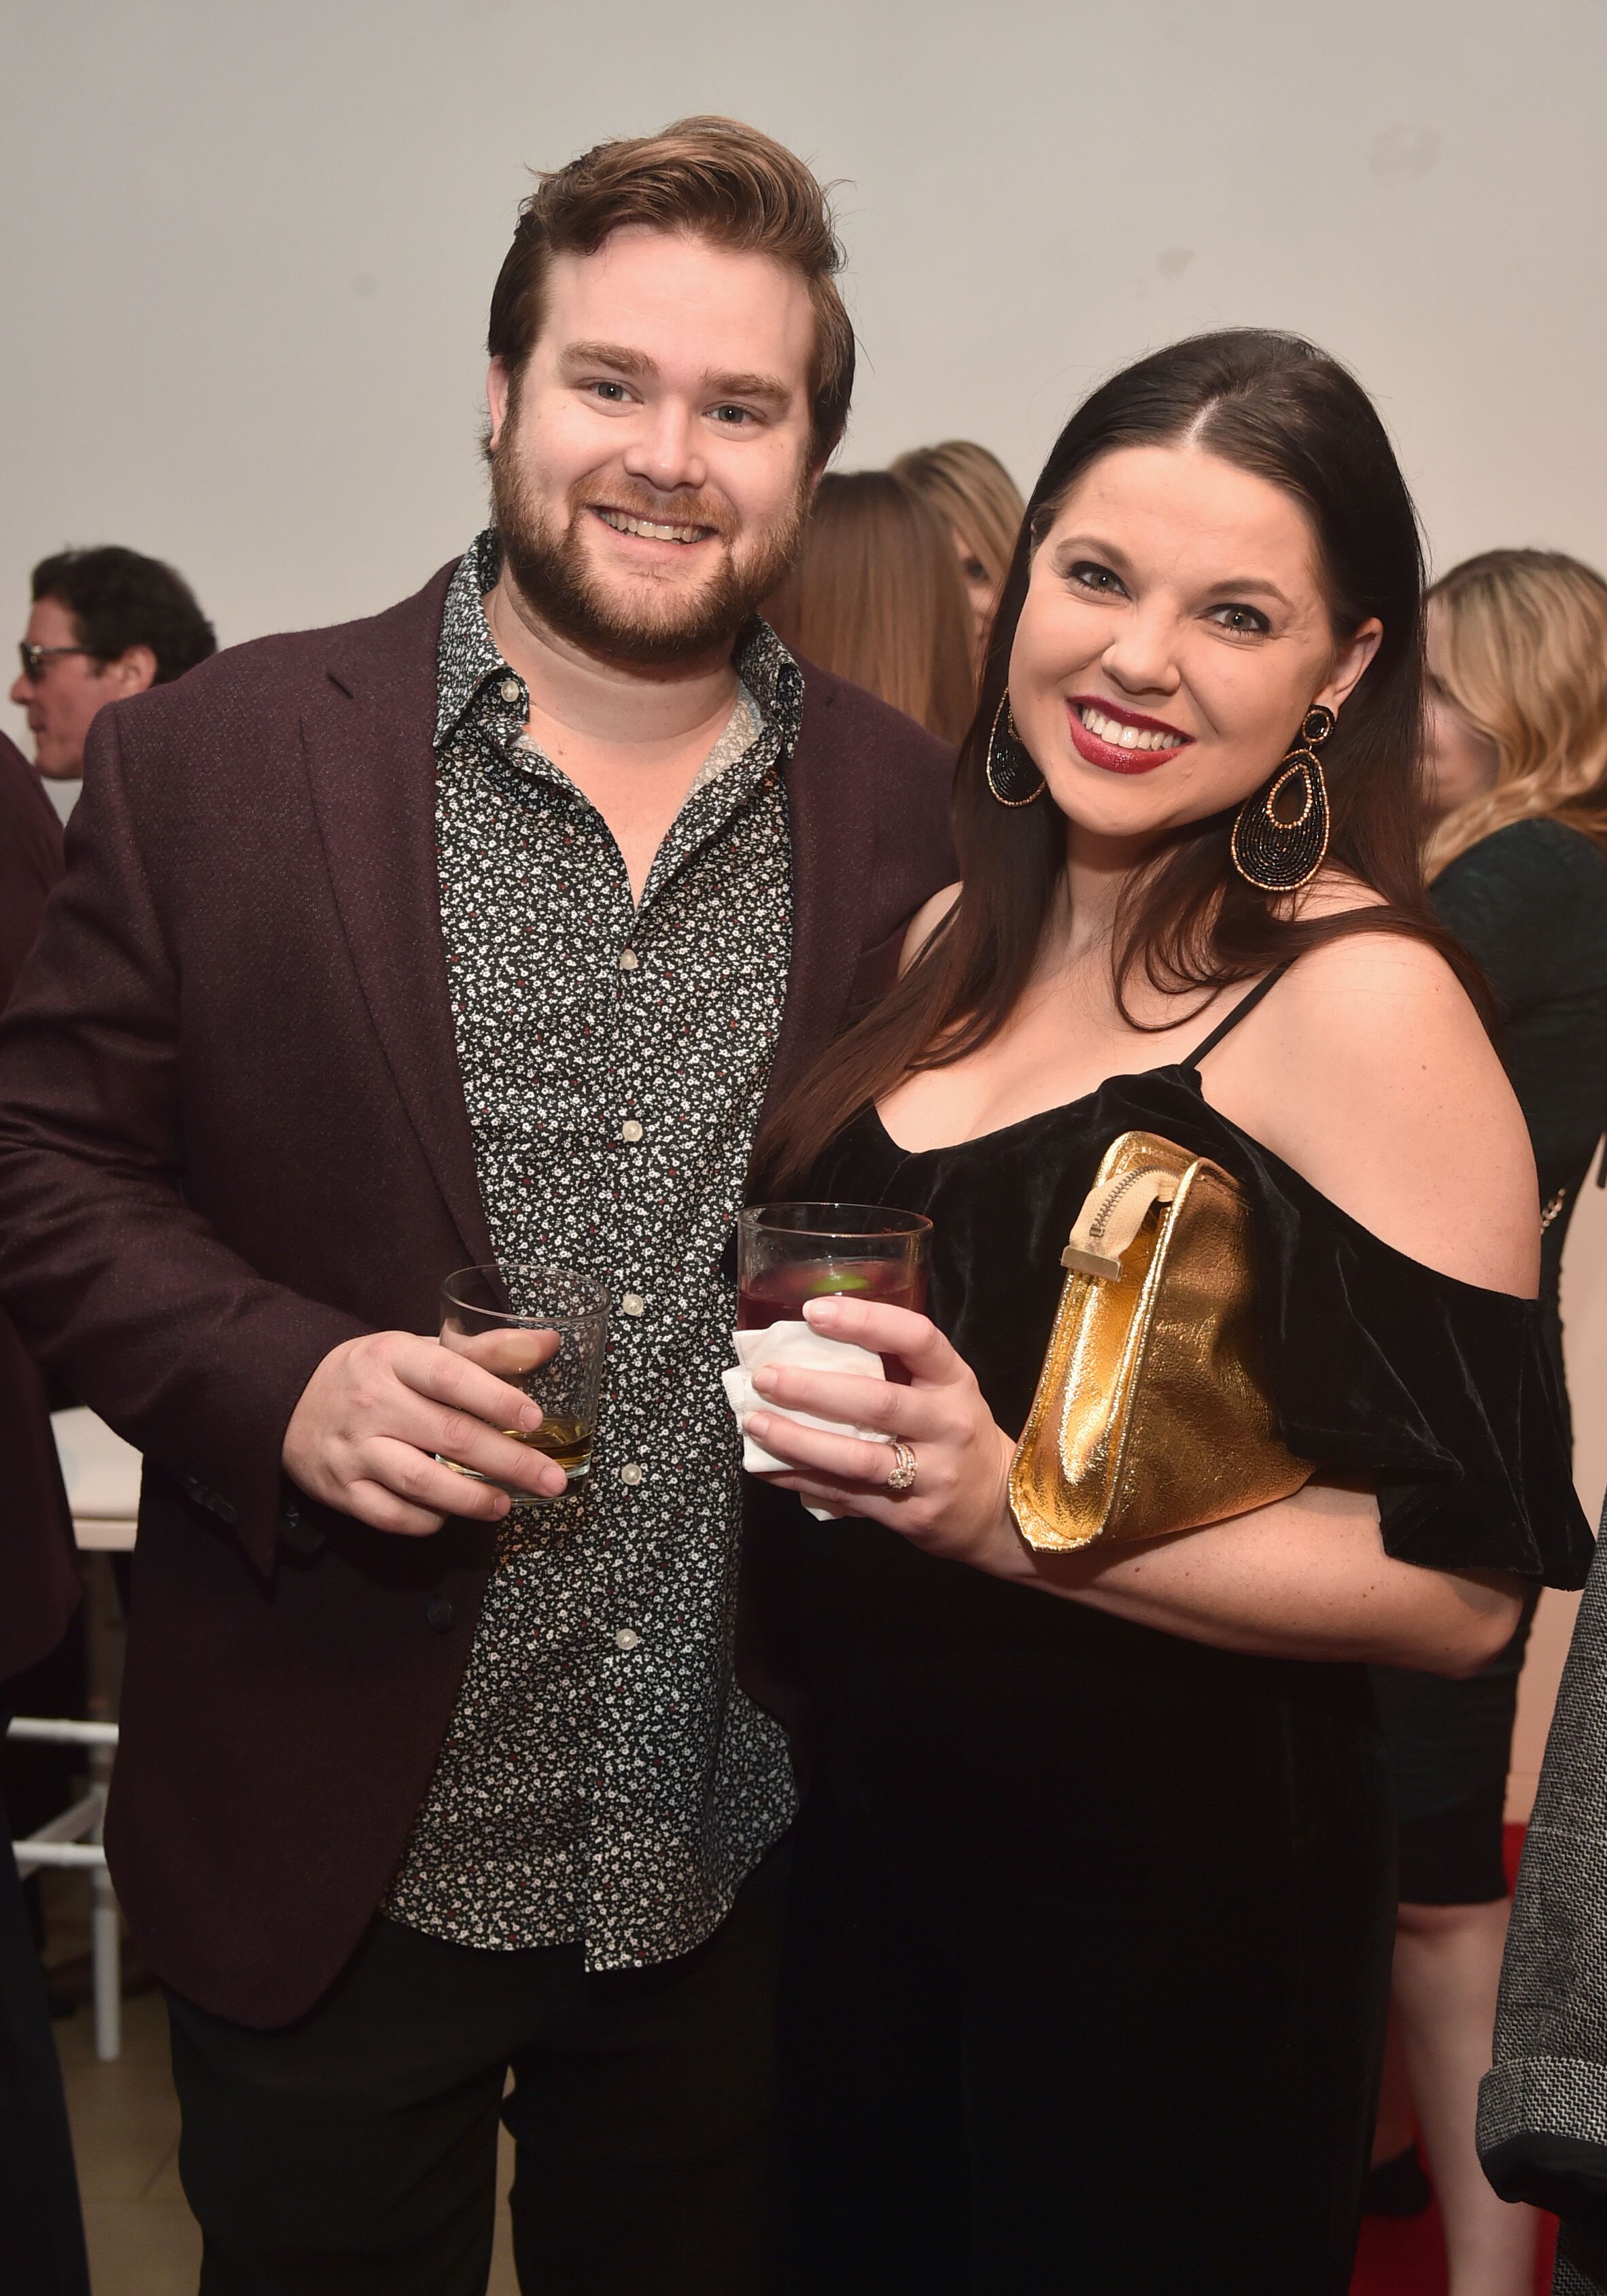  Dillon King and Amy Duggar attend WE tv celebrates the return of "Love After Lockup" with panel, "Real Love: Relationship Reality TV's Past, Present & Future," at The Paley Center for Media on December 11, 2018 in Beverly Hills, California | Photo: Getty Images